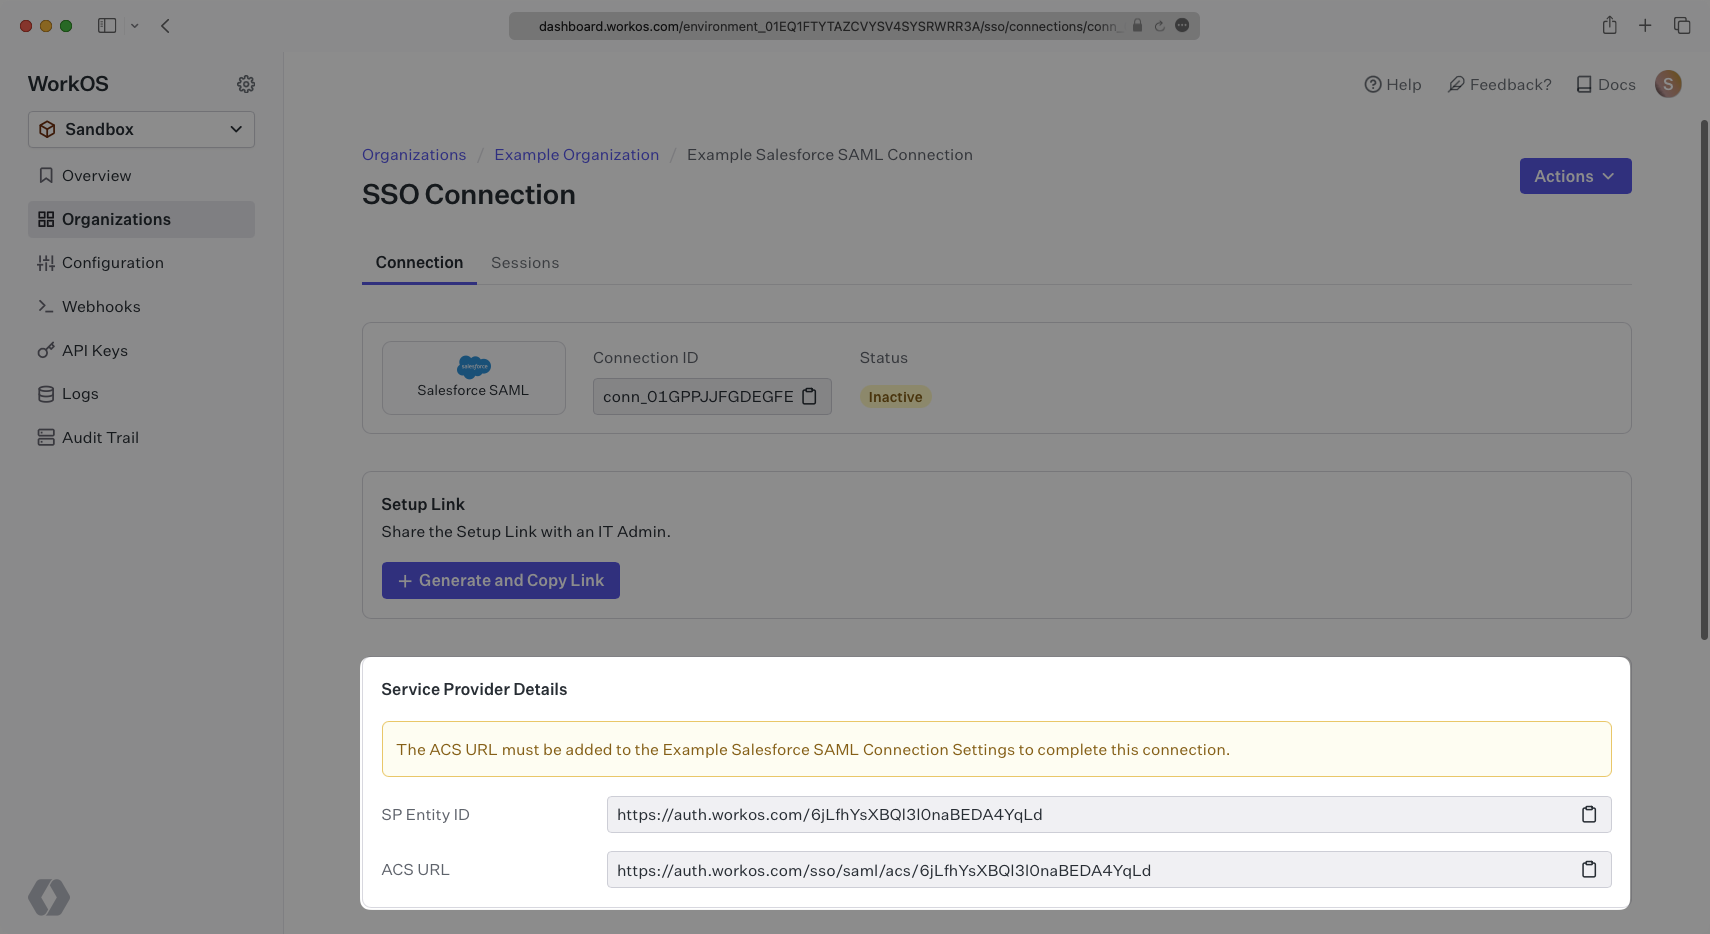 A screenshot showing where to find the ACS URL and SP Entity ID in the WorkOS dashboard.